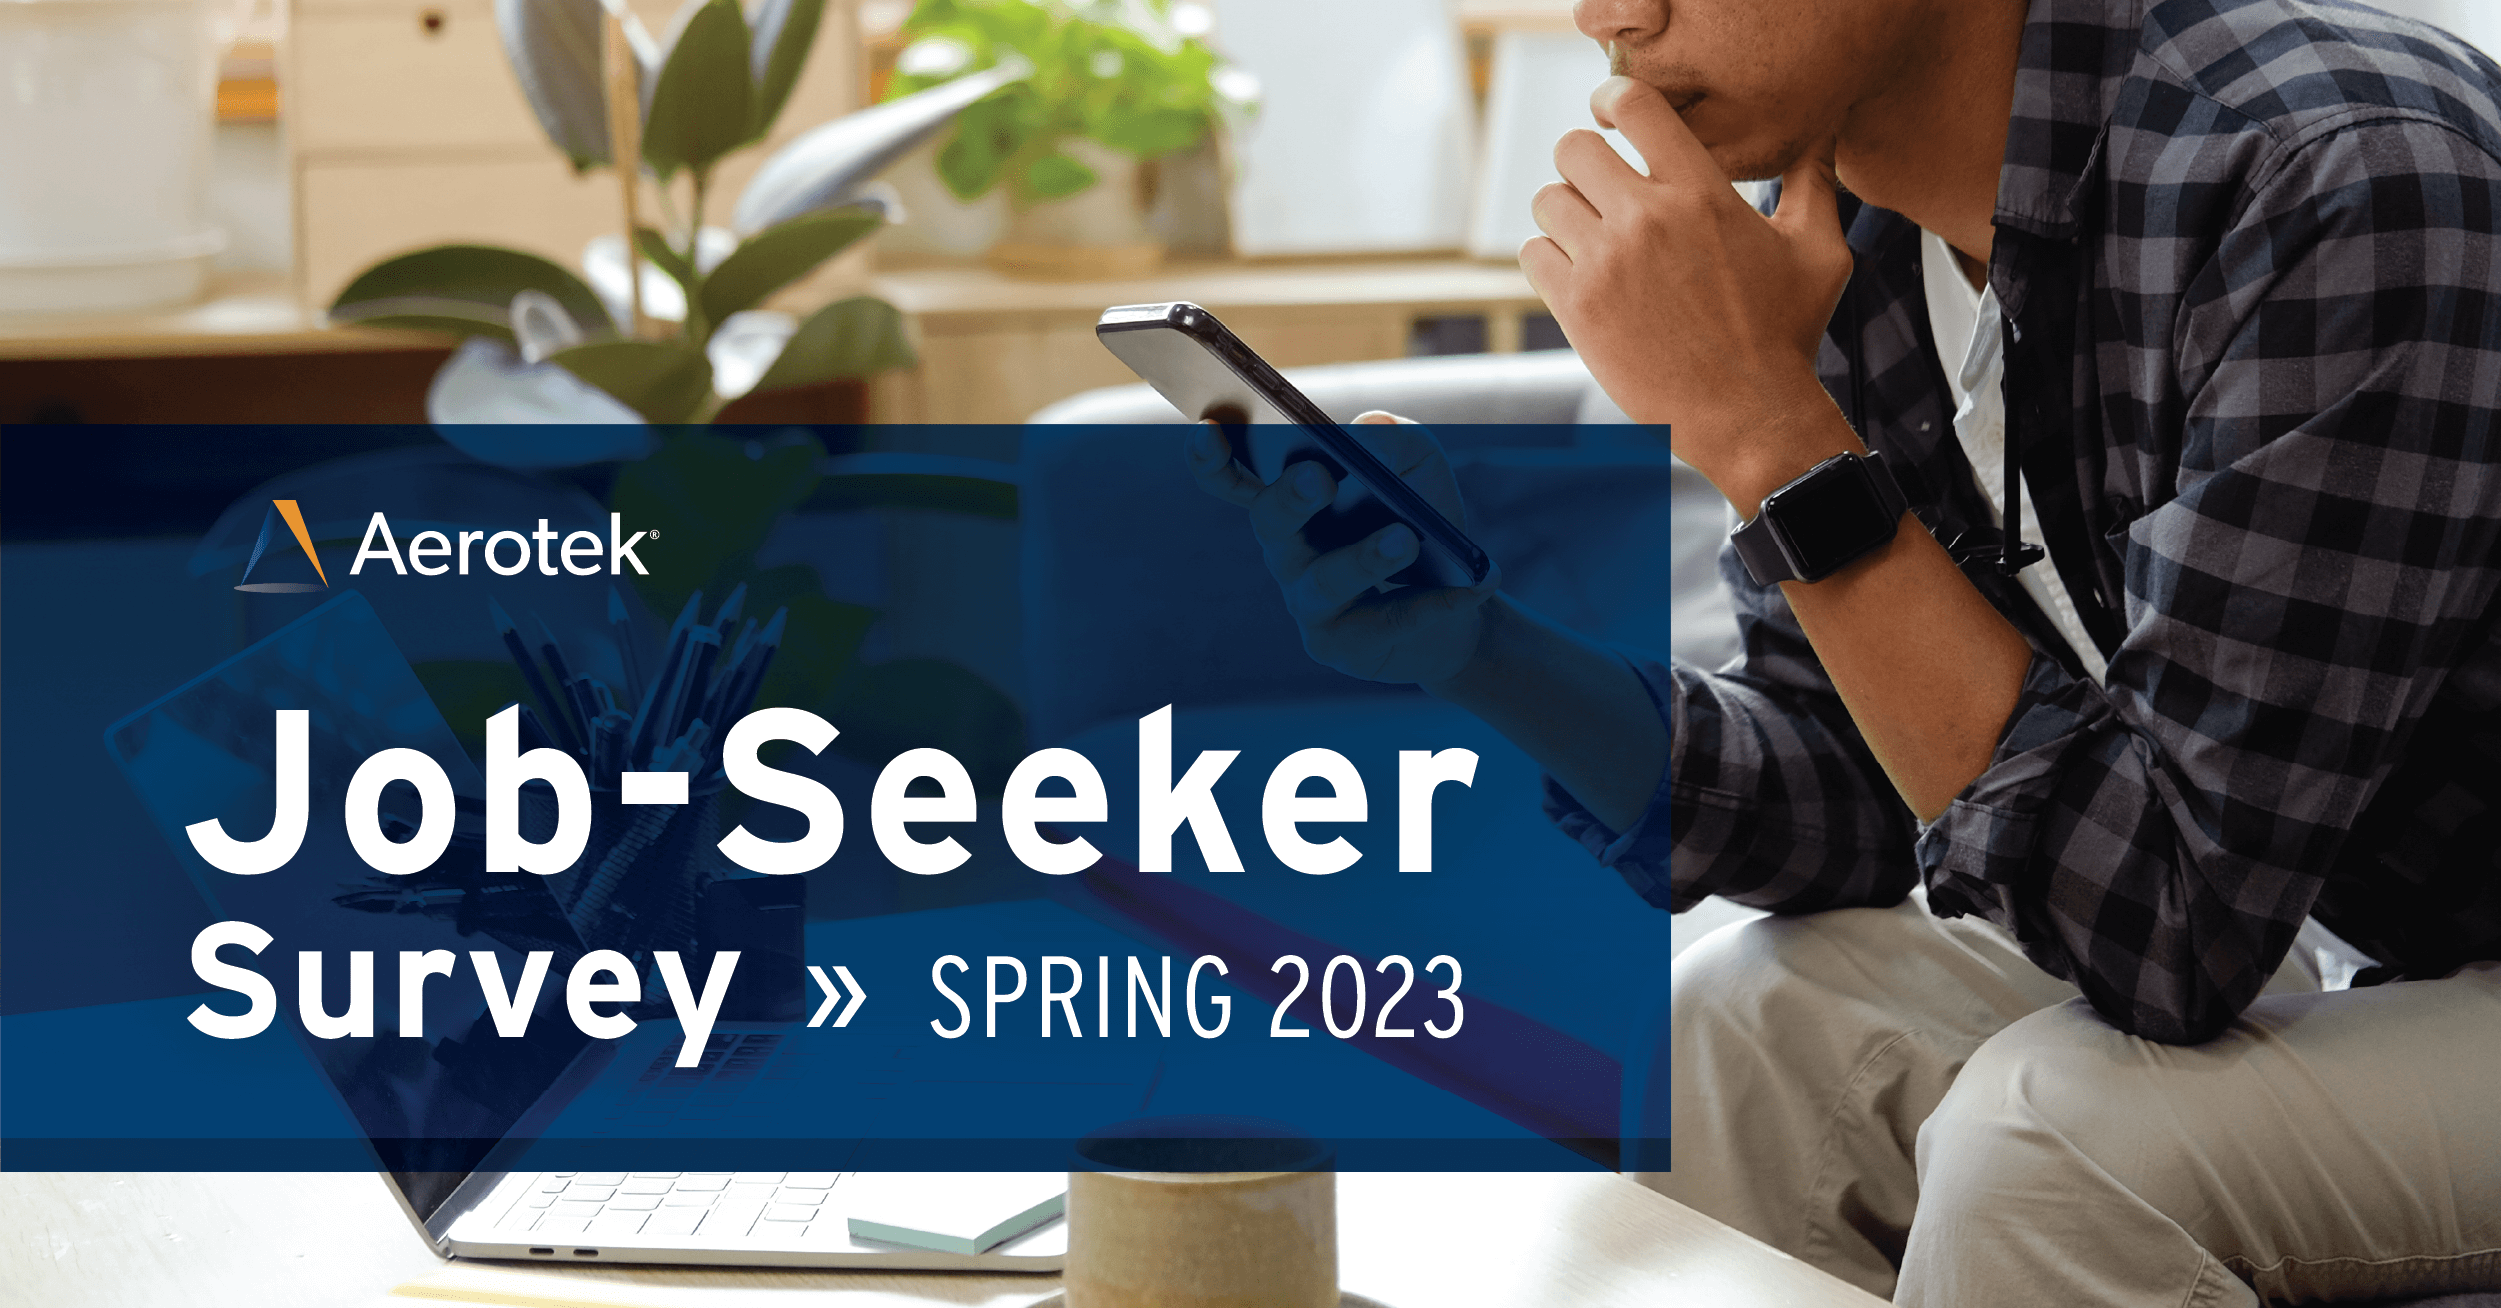 A person looks at their phone and a graphic says Job-Seeker Survey Spring 2023